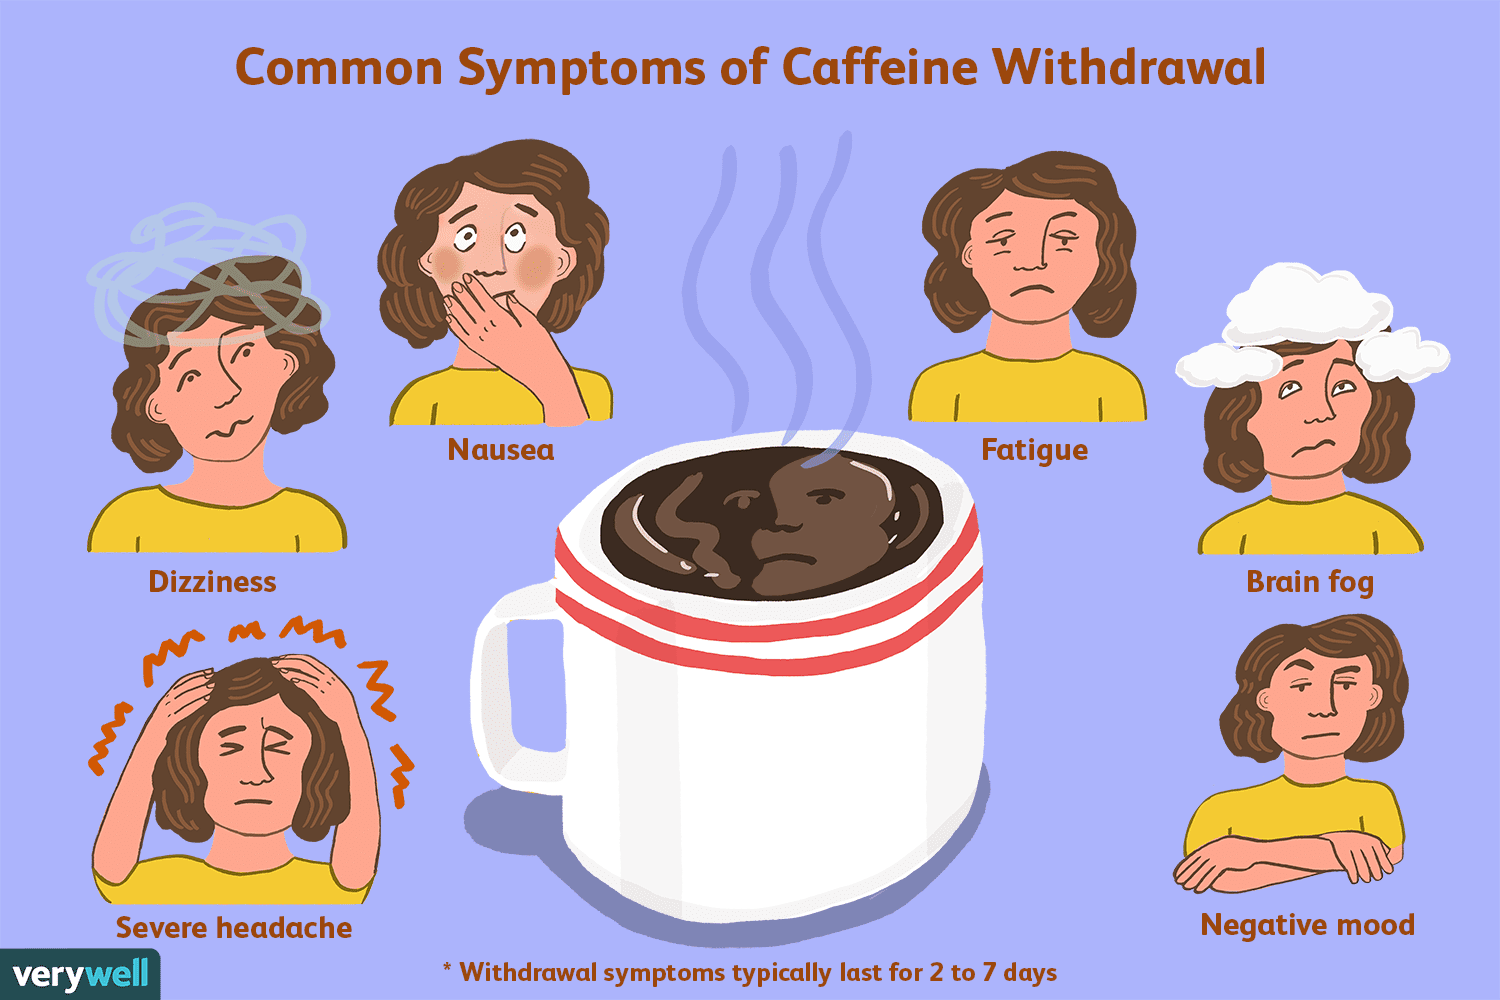 Can Caffeine Withdrawal Cause Dizziness?